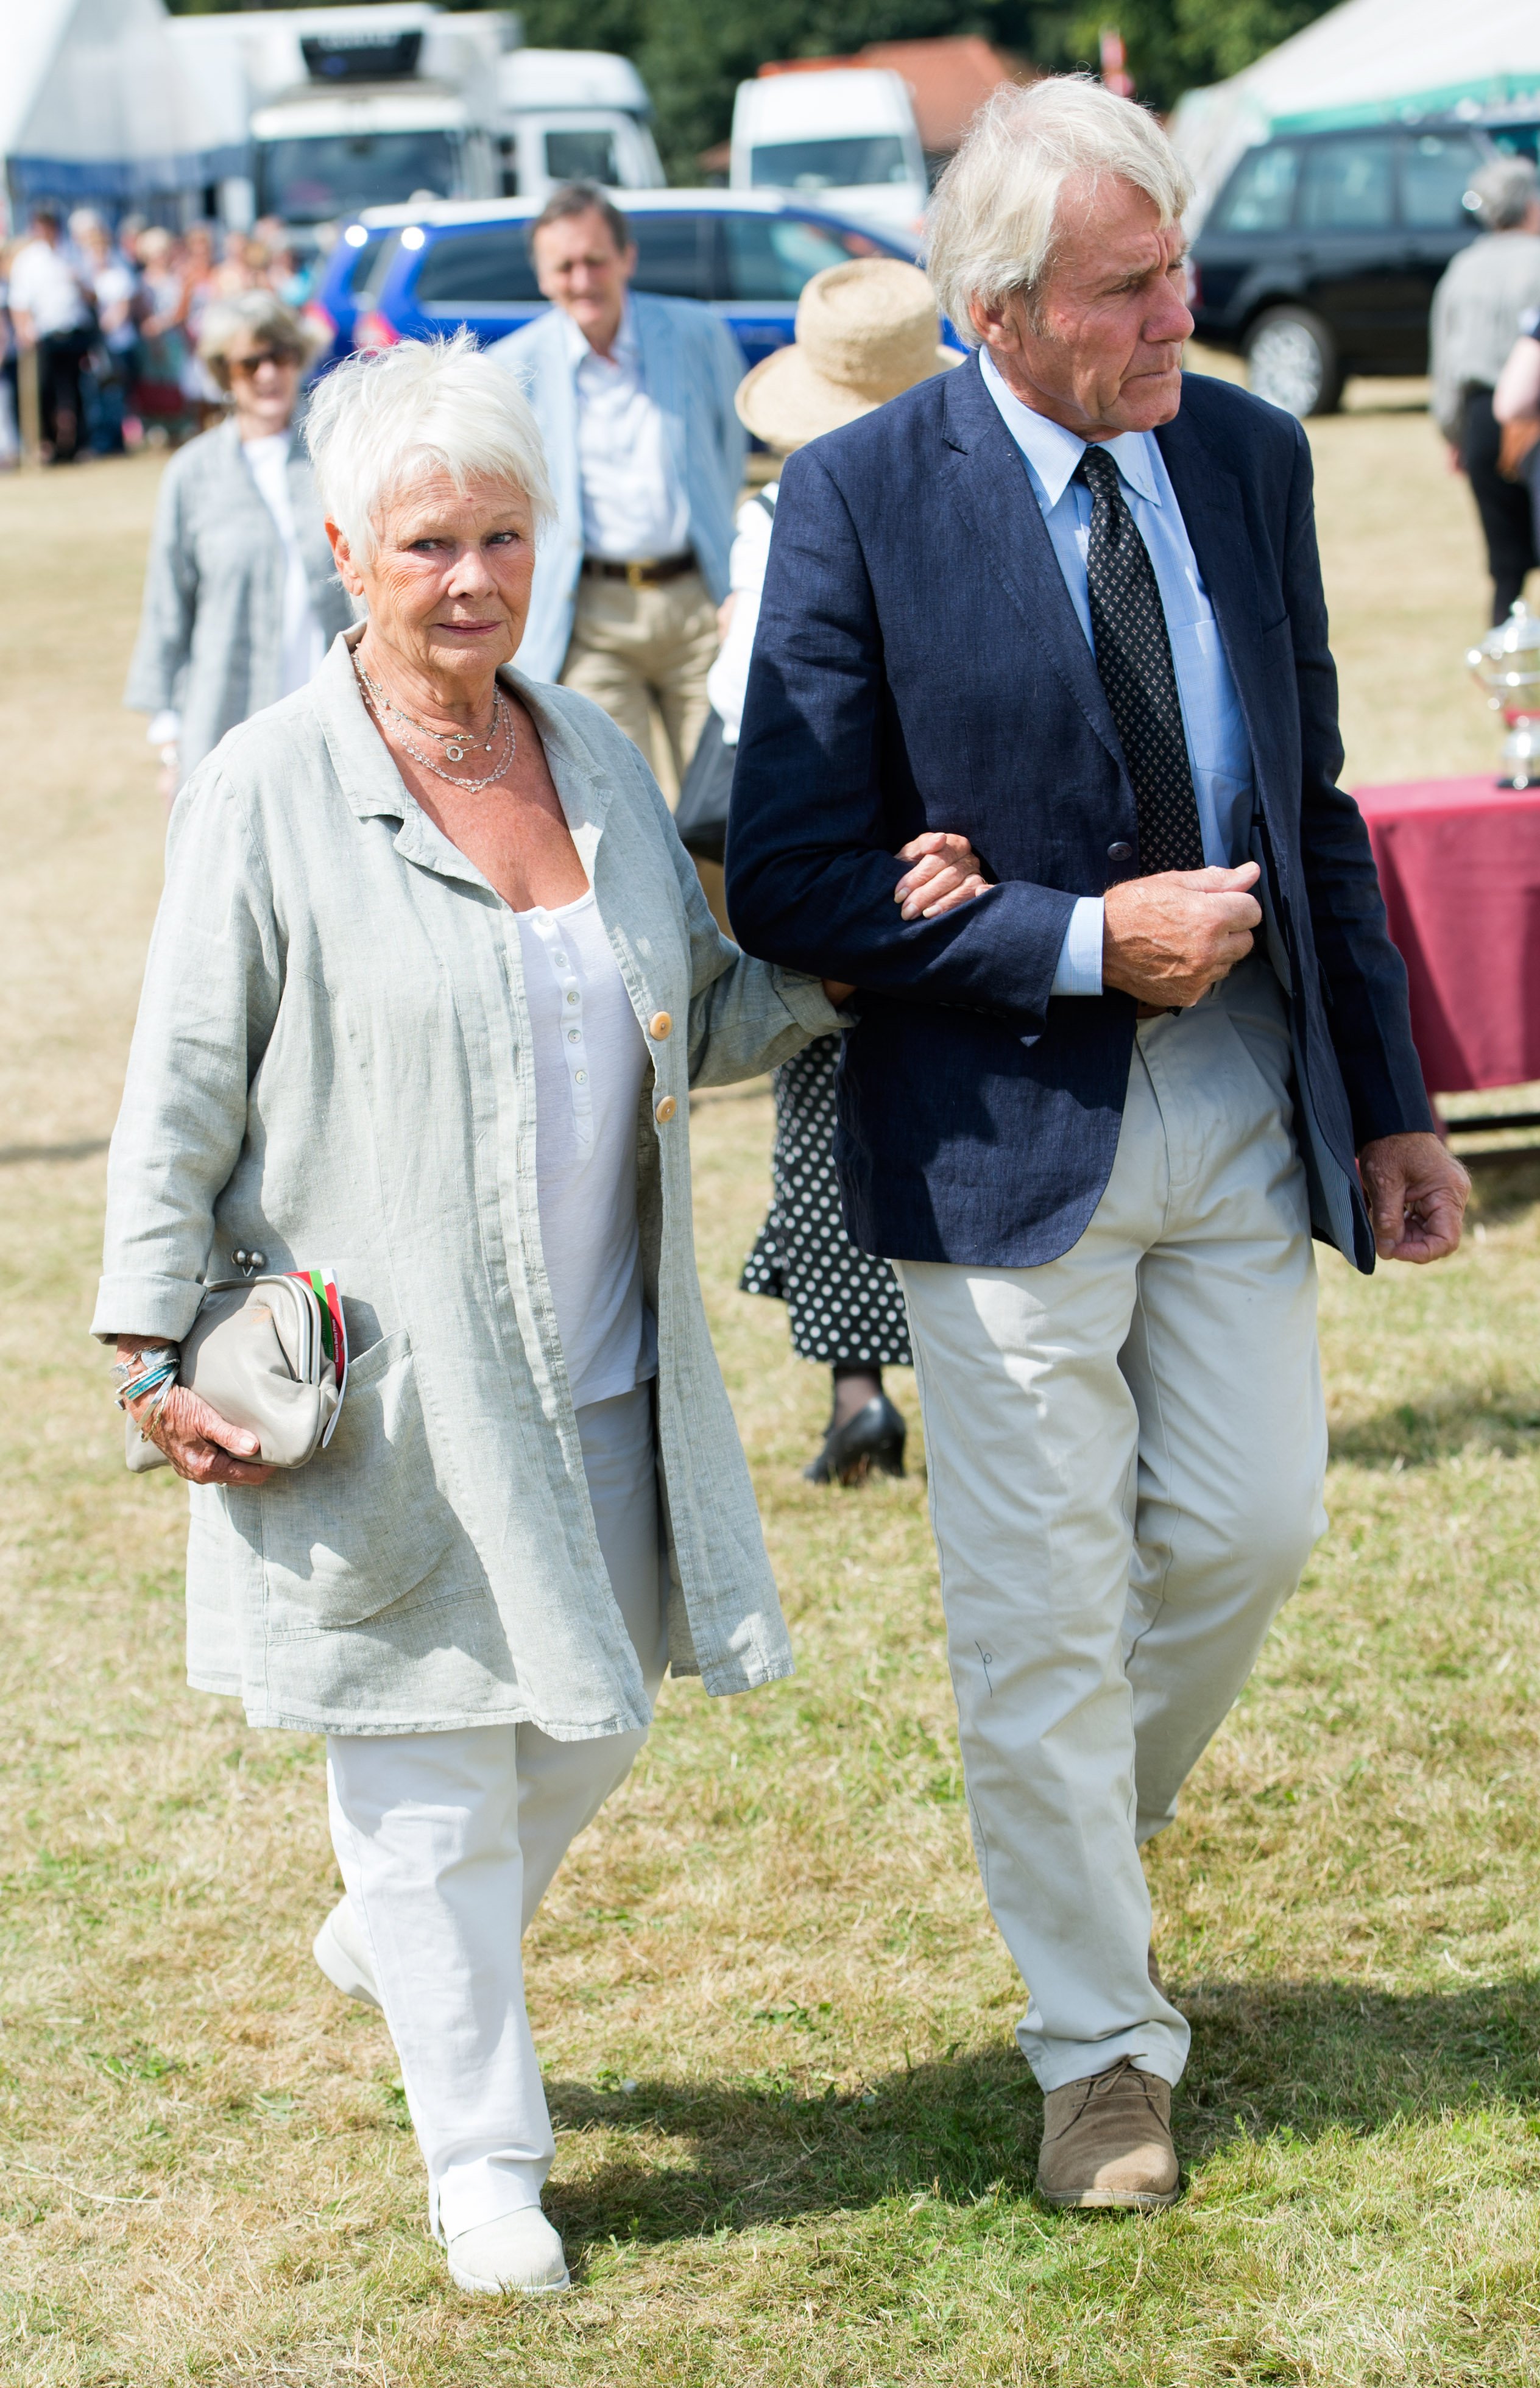 Judi Dench and David Mills at the Sandringham Flower Show on July 30, 2014 | Source: Getty Images